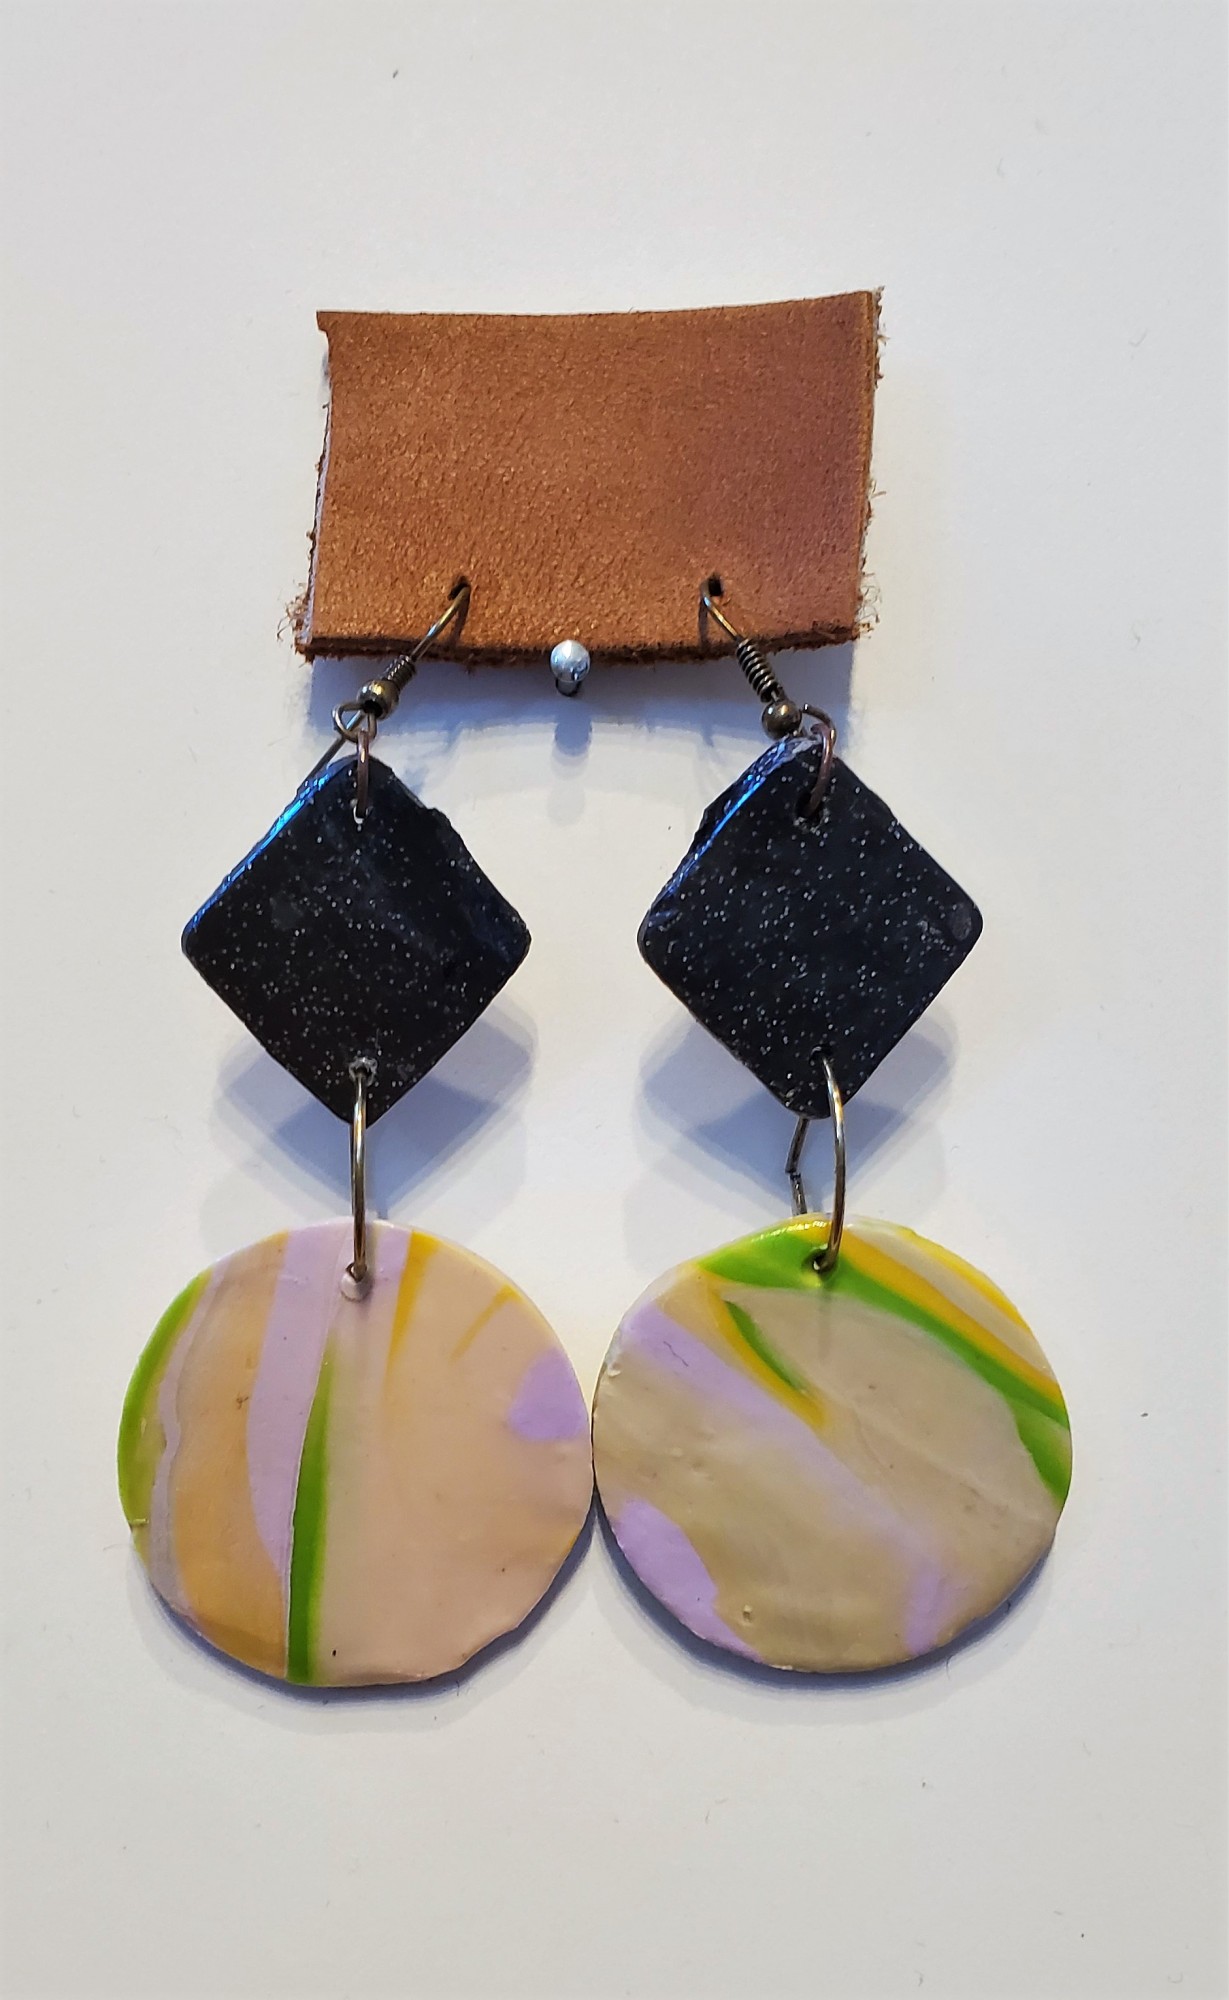 Two Tier Marbled Polymer Clay Earrings